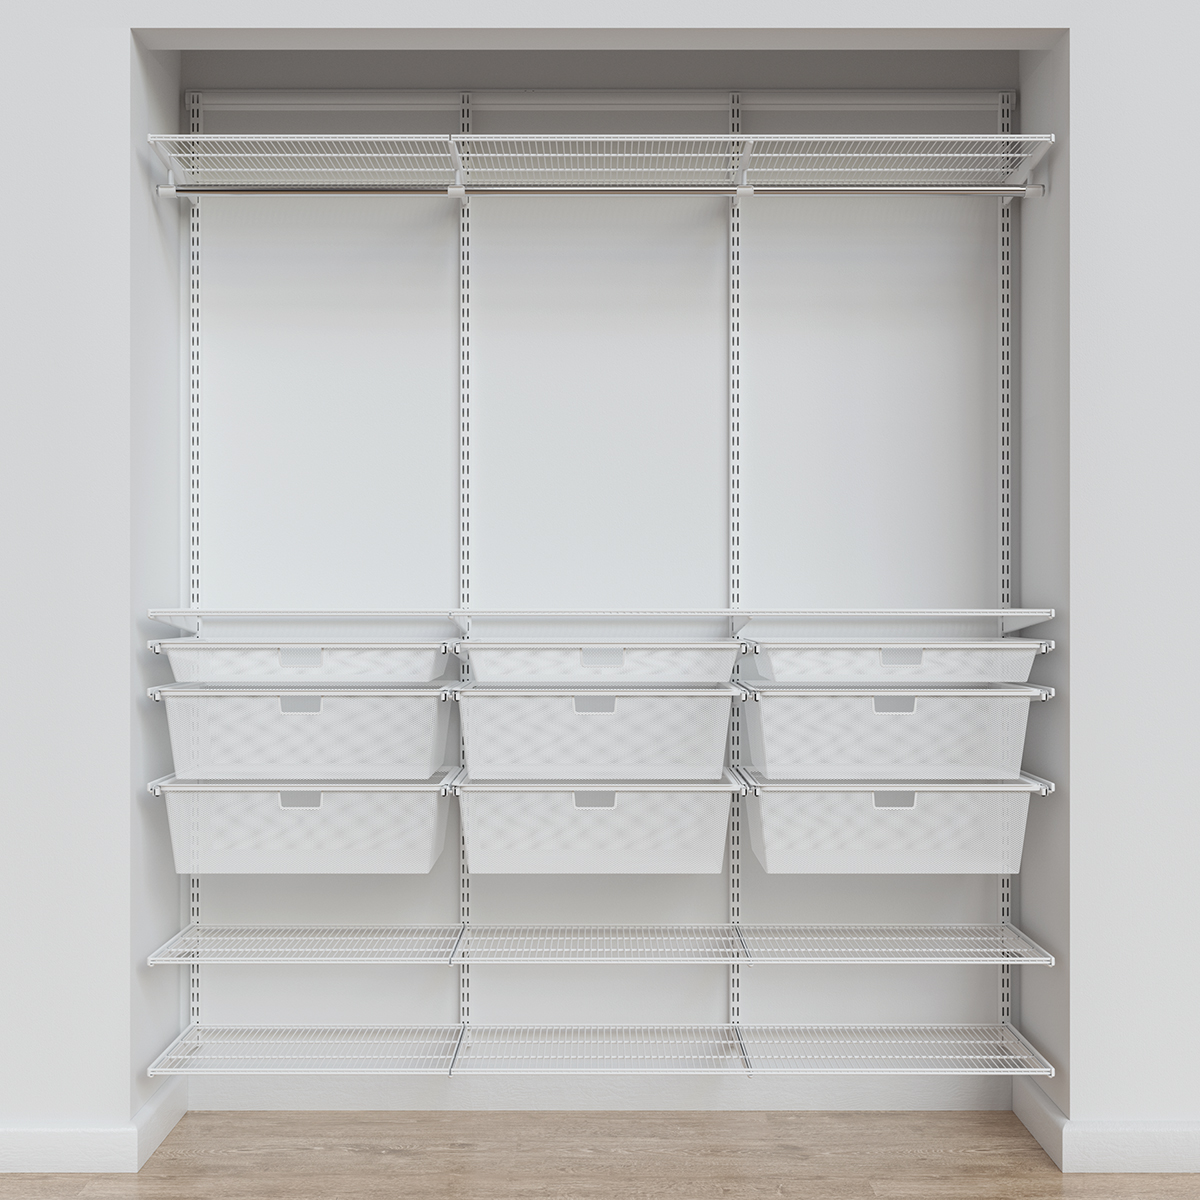 https://www.containerstore.com/catalogimages/426432/6ft_white_10086771_unpropped.jpg